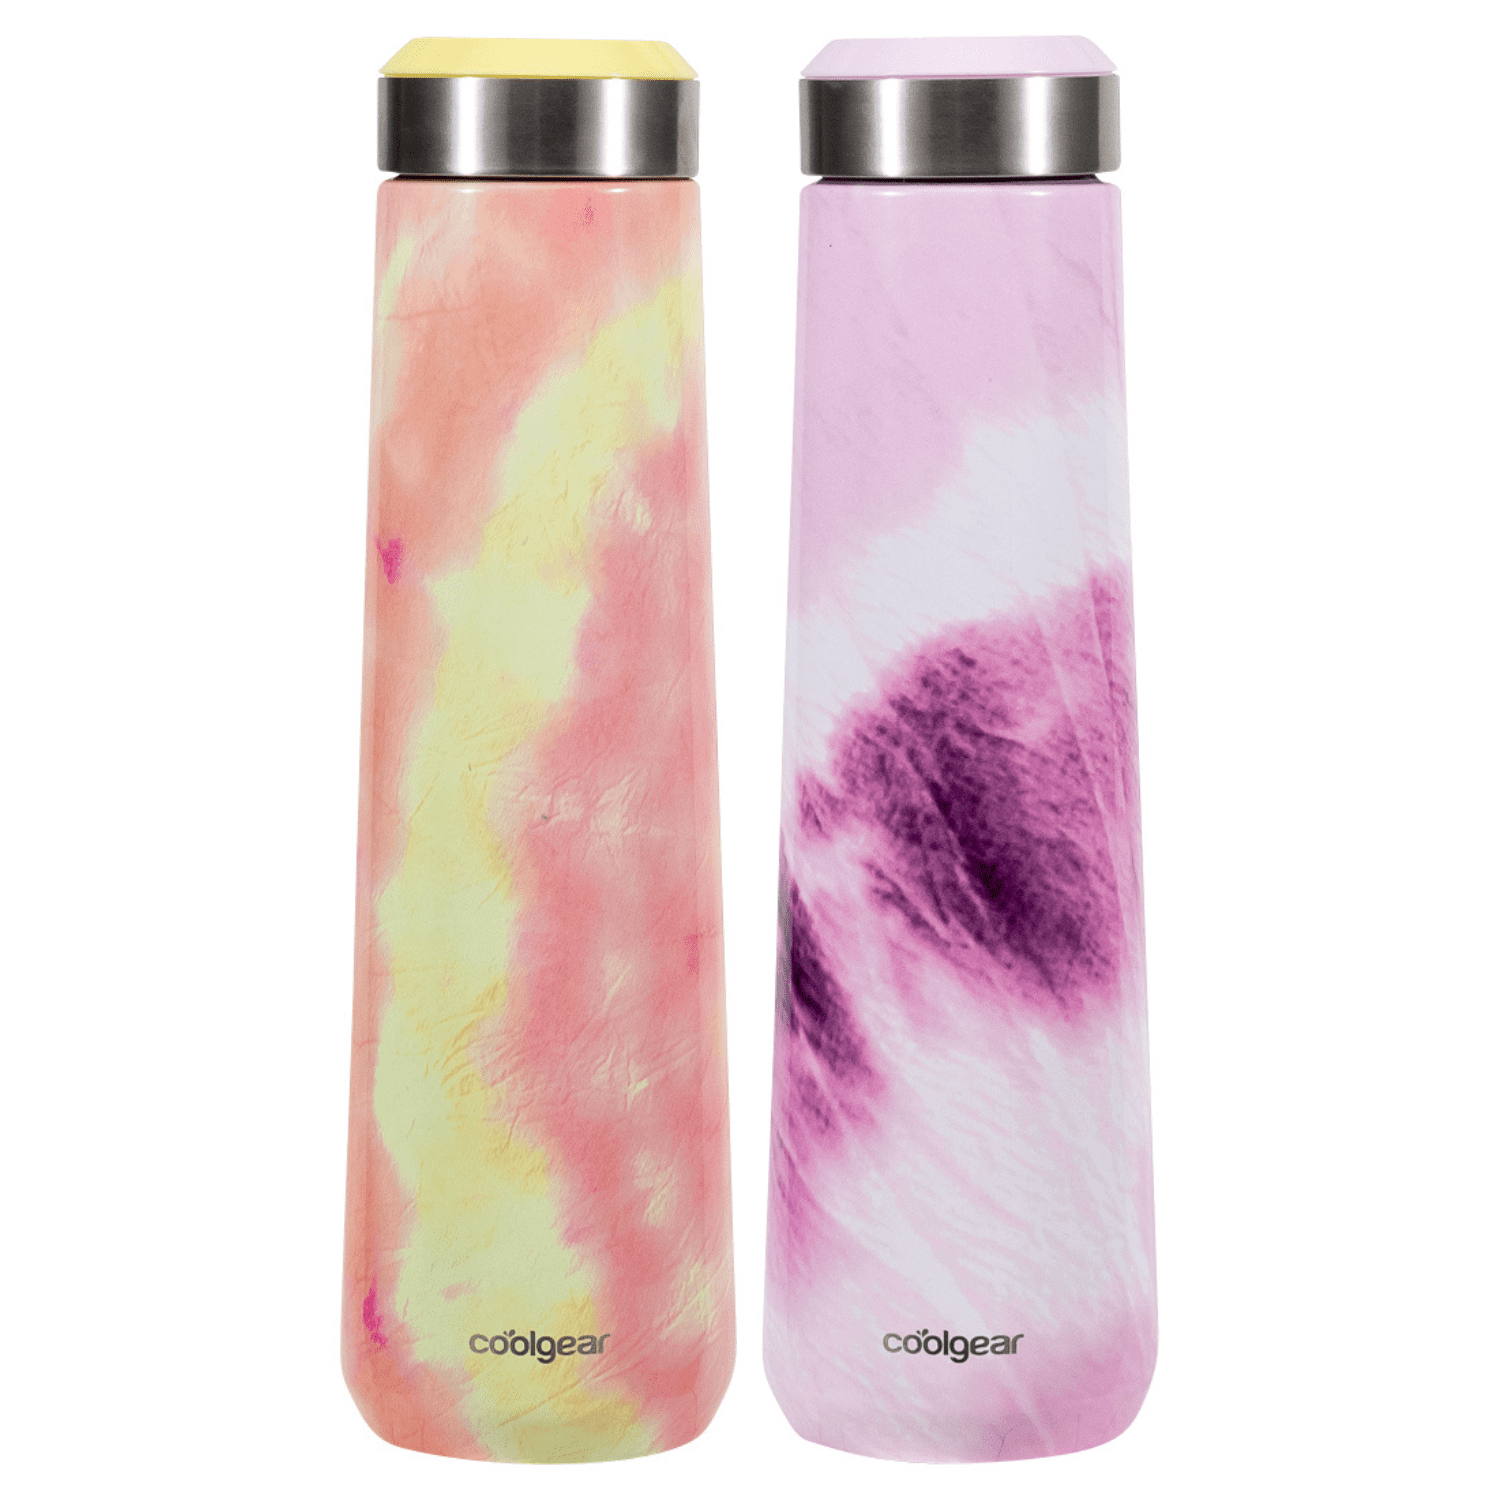 Zulu 26 oz. Stainless Insulated Water Bottle, 2 Pack